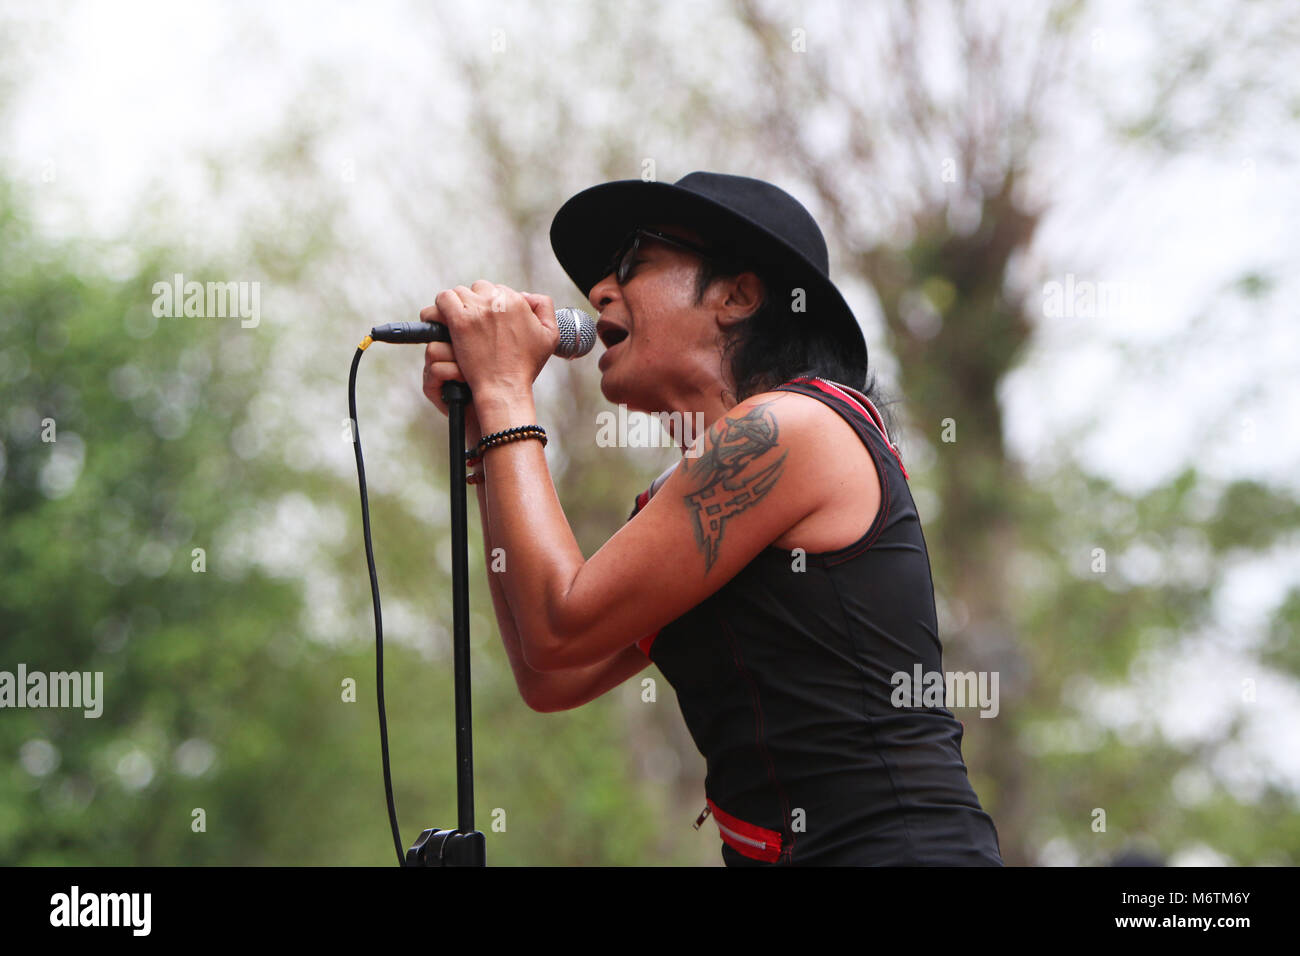 Bogor, Indonesia. 22nd July, 2017. Indonesia rock star, Andy /RIF vocalist  of the famous rock band in Indonesia /RIF band perform in the Bogor tourist  park, Indonesia, entertaining the audience with the